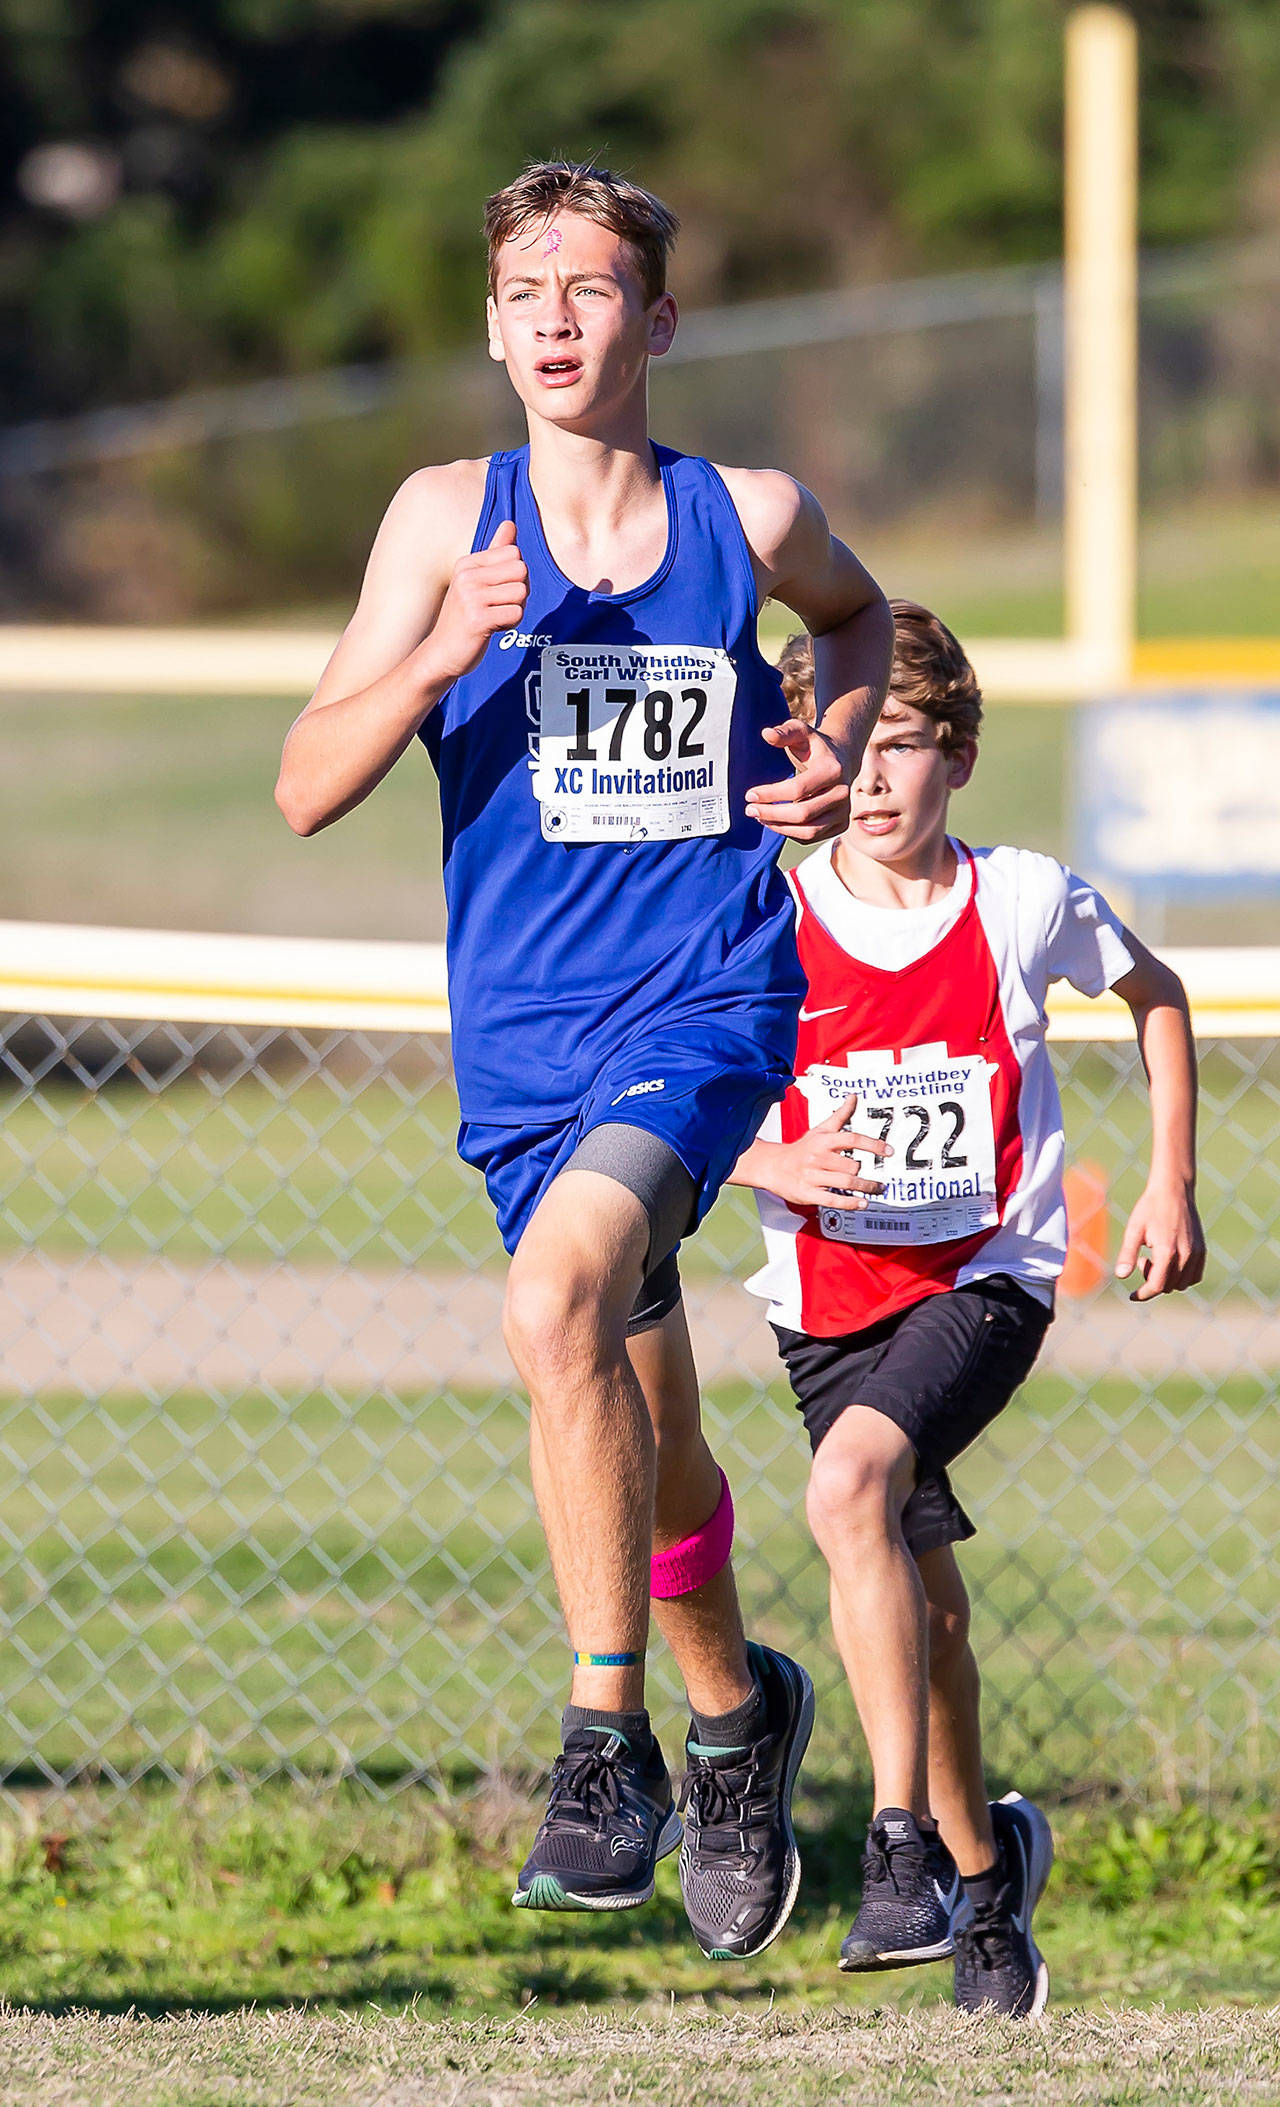 South Whidbey’s Nicholas Muller pulls away to win the boys race.(Photo by John Fisken)